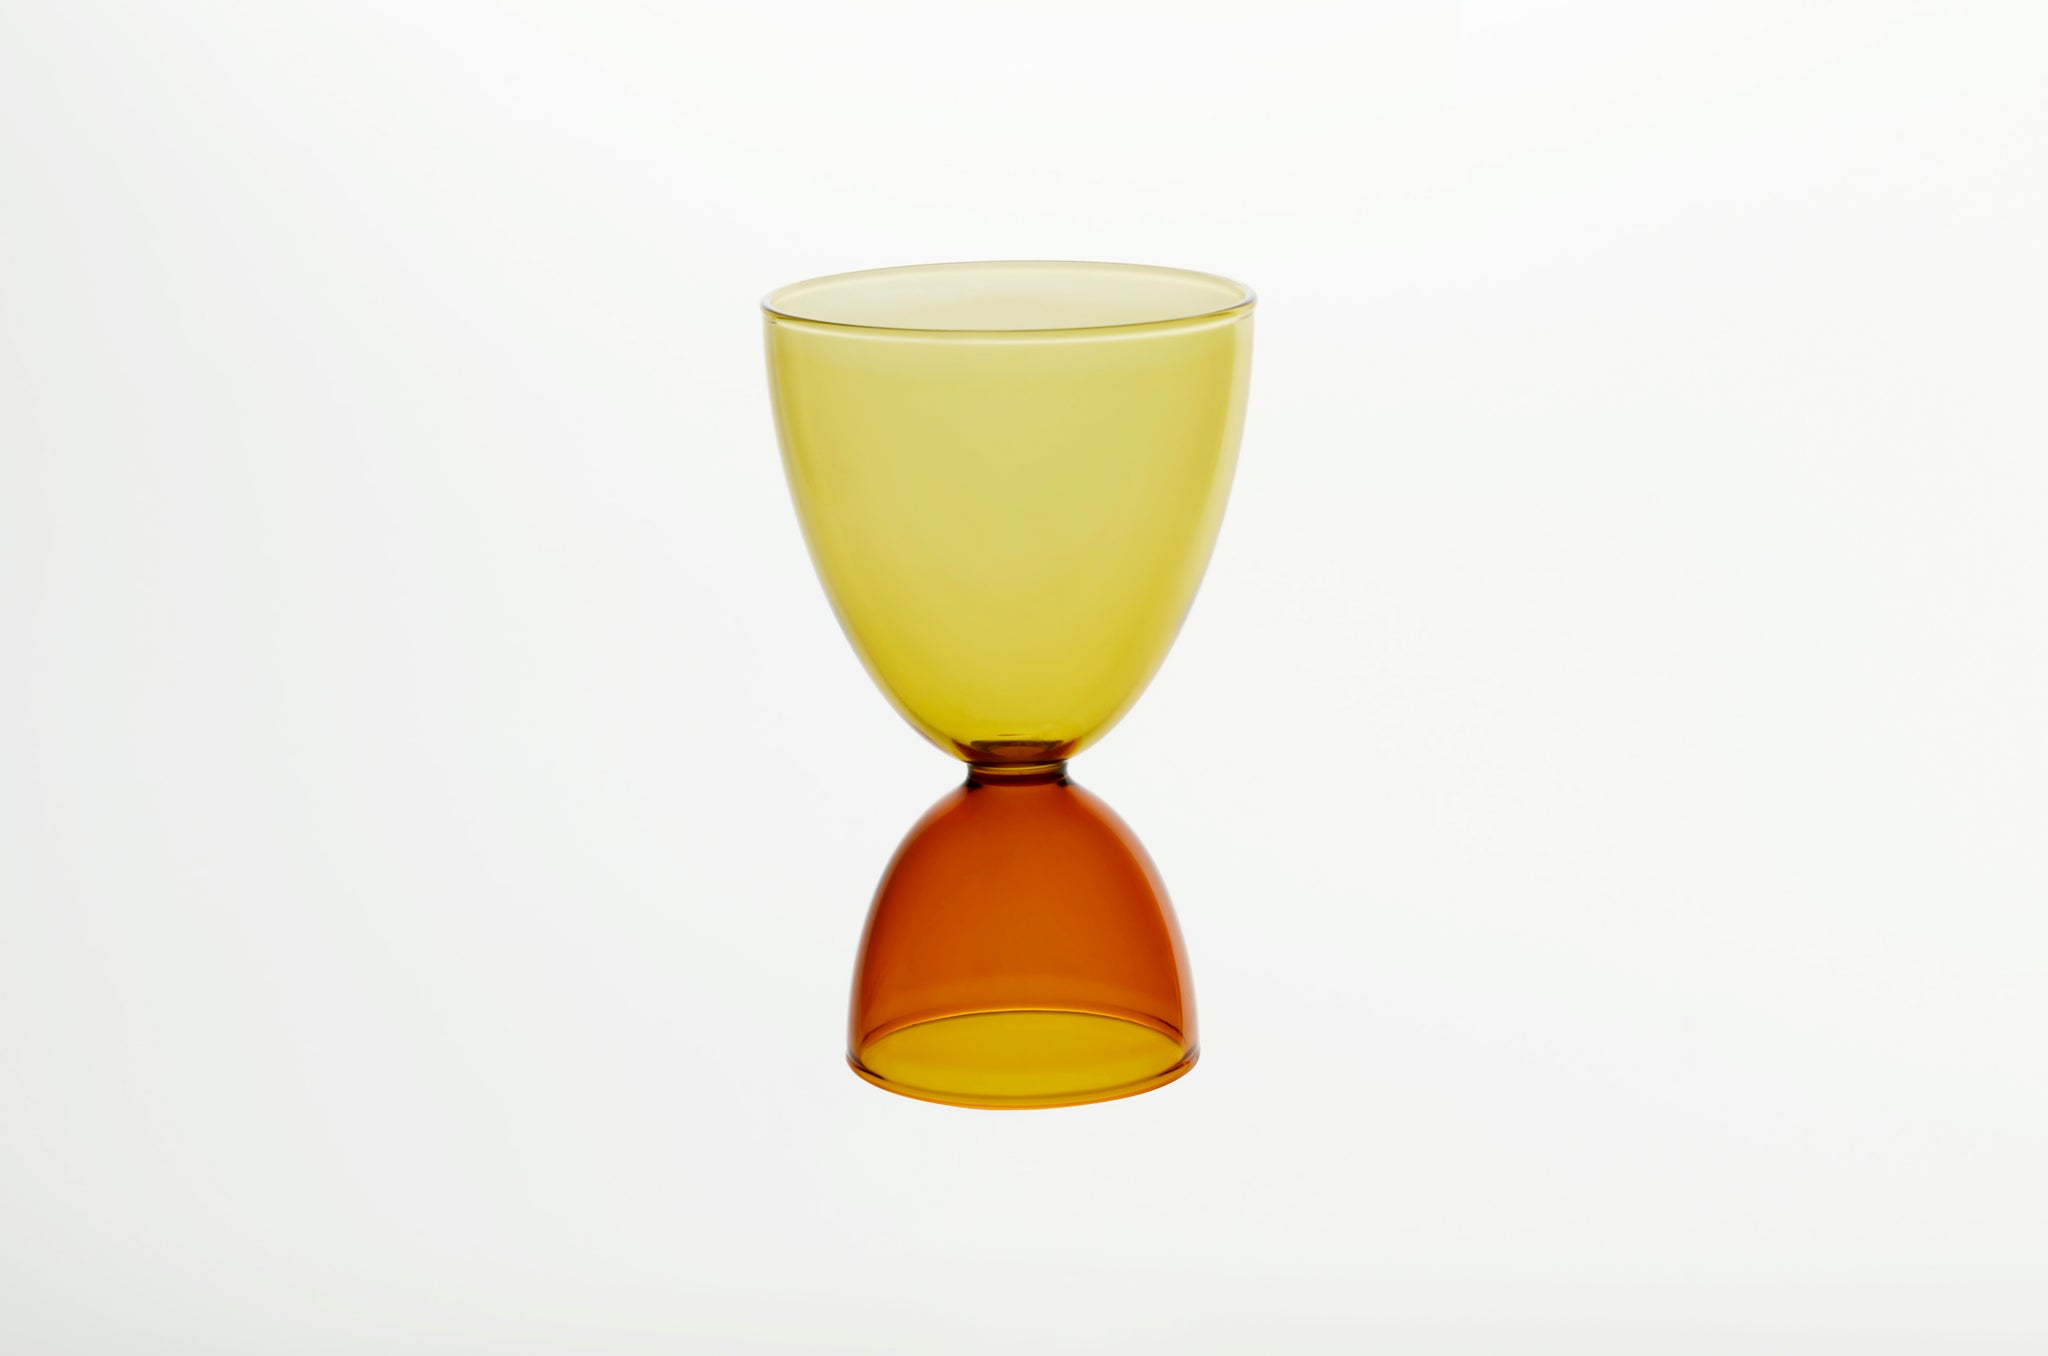 elysian collective hourglass duotone honey amber cocktail glass by mamo